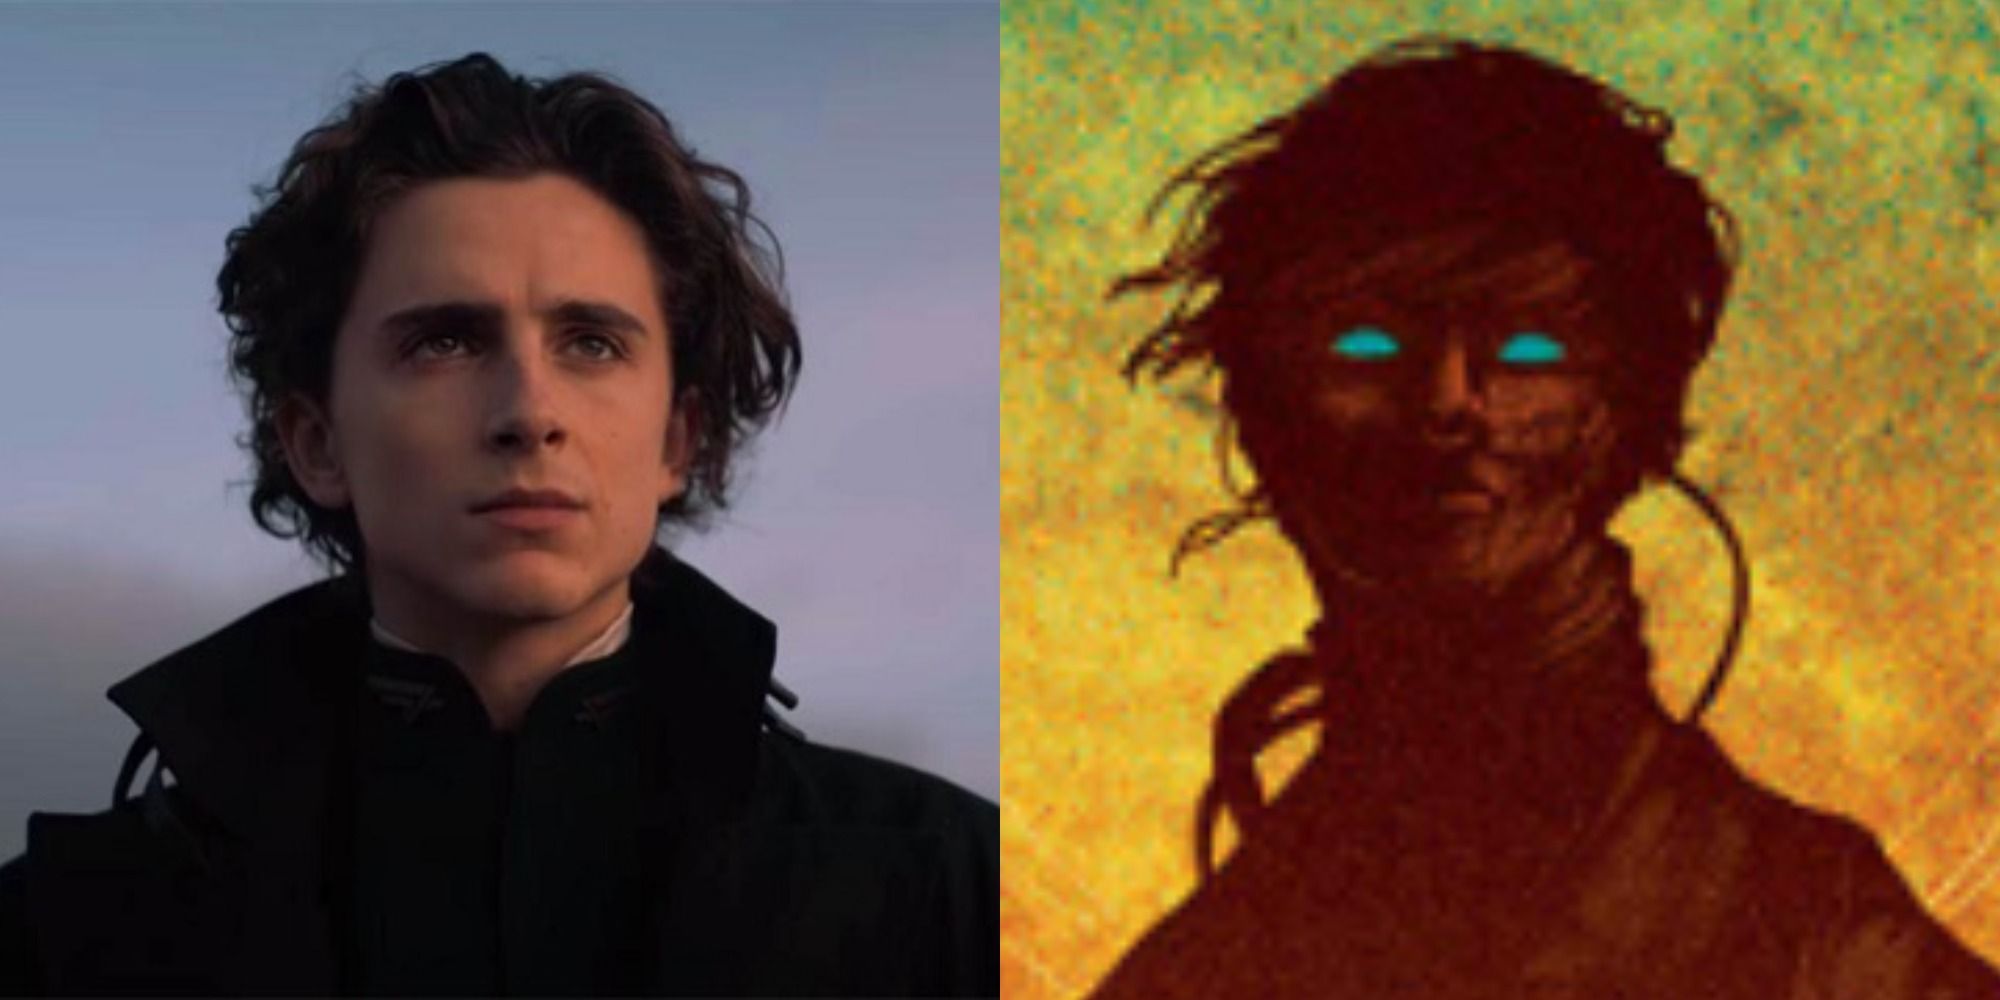 Timothee Chalamet as Paul Atreides from Dune 2021 and Paul Atreides on the cover of Frank Herbert book Dune